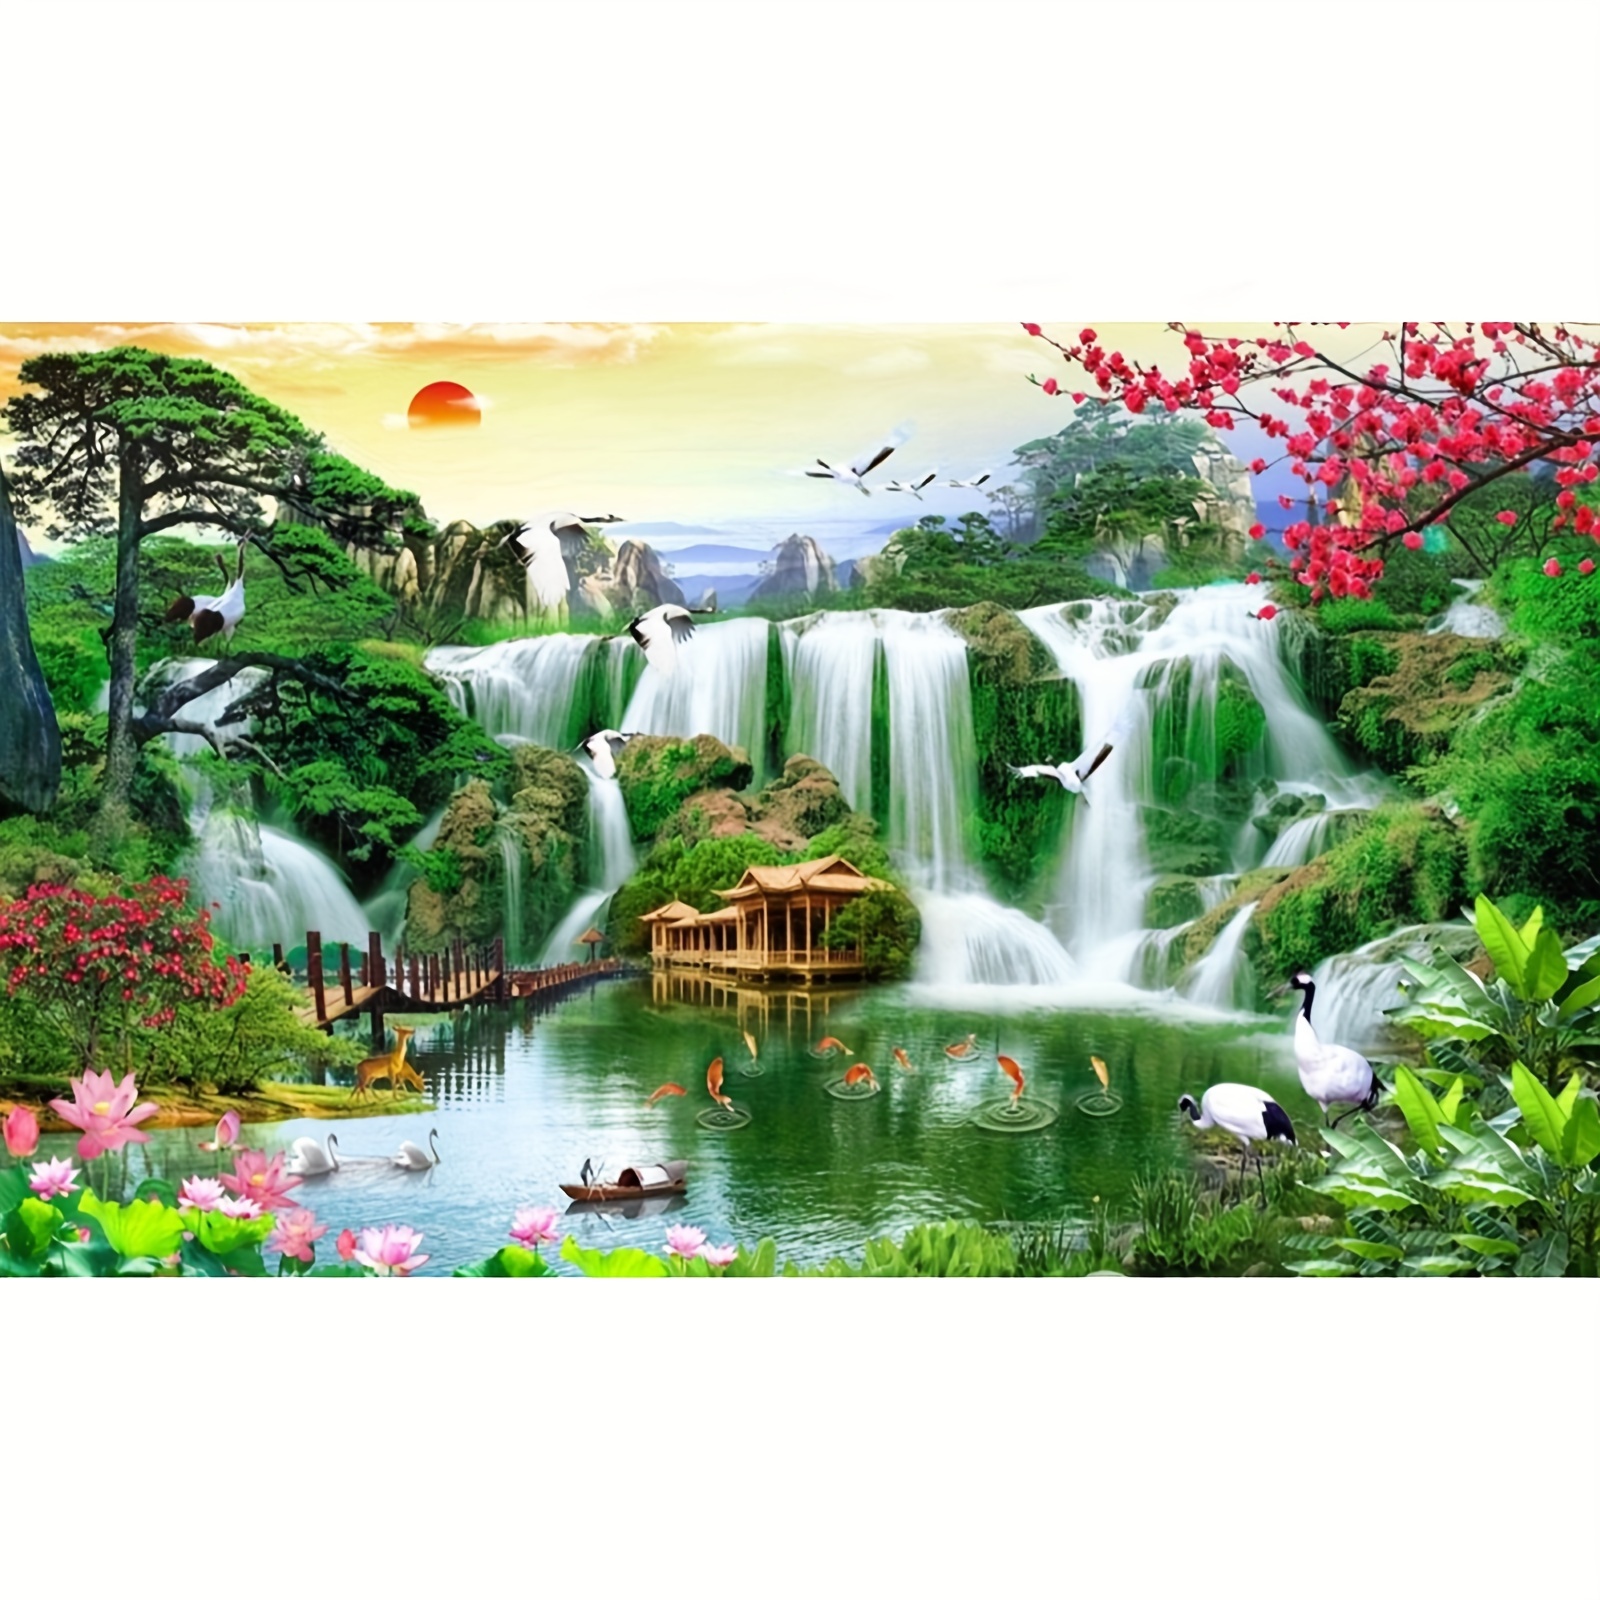 

5d Diy Diamond Painting Kit Round Shape Canvas Landscape Waterfall Mosaic Art Full Drill Cross Stitch Wall Decor For Bedroom, Office, Living Room 40x70cm/15.7x27.5inch